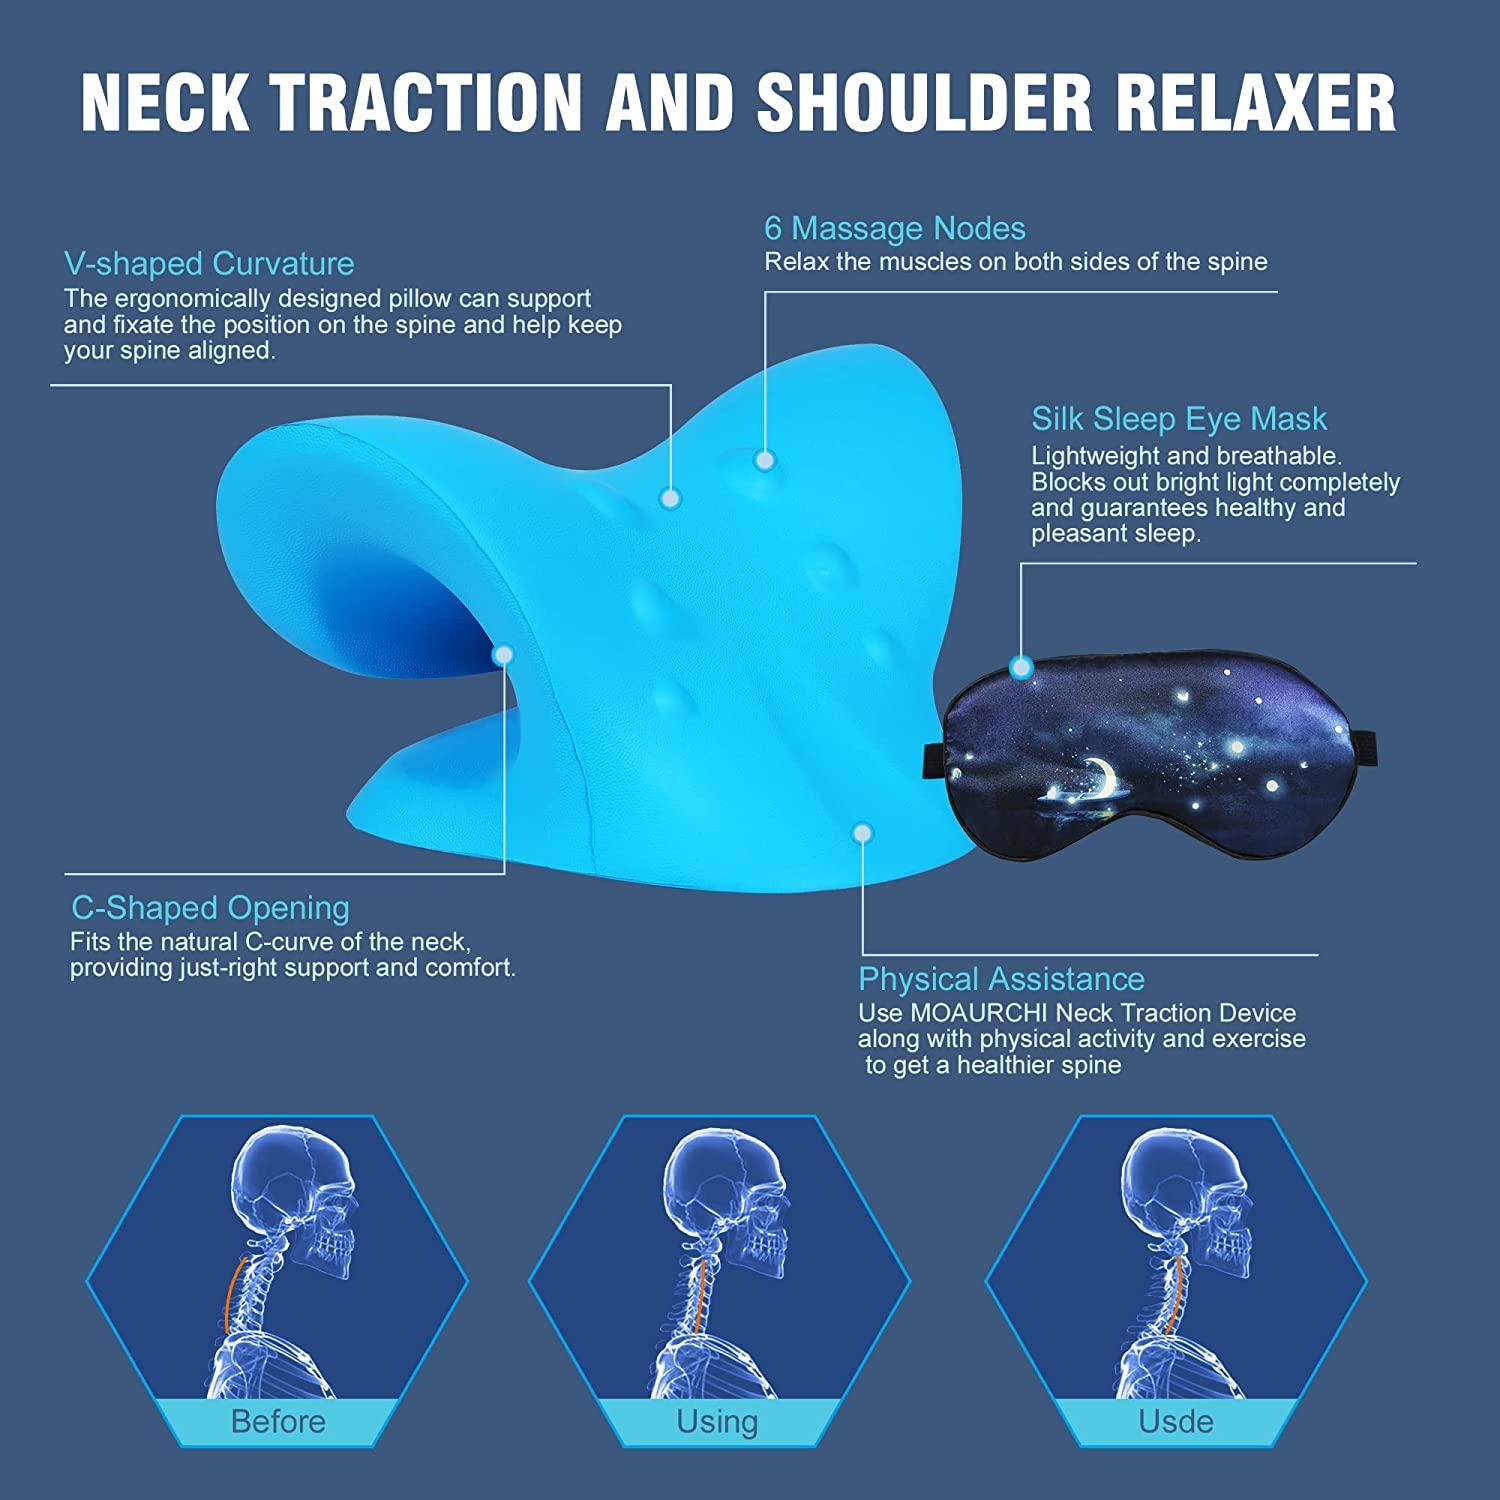 Comfortable Neck Stretcher for Neck Pain Relief, Neck and Shoulder Relaxer  Cervical Neck Traction Device for TMJ Pain Relief and Muscle Relax